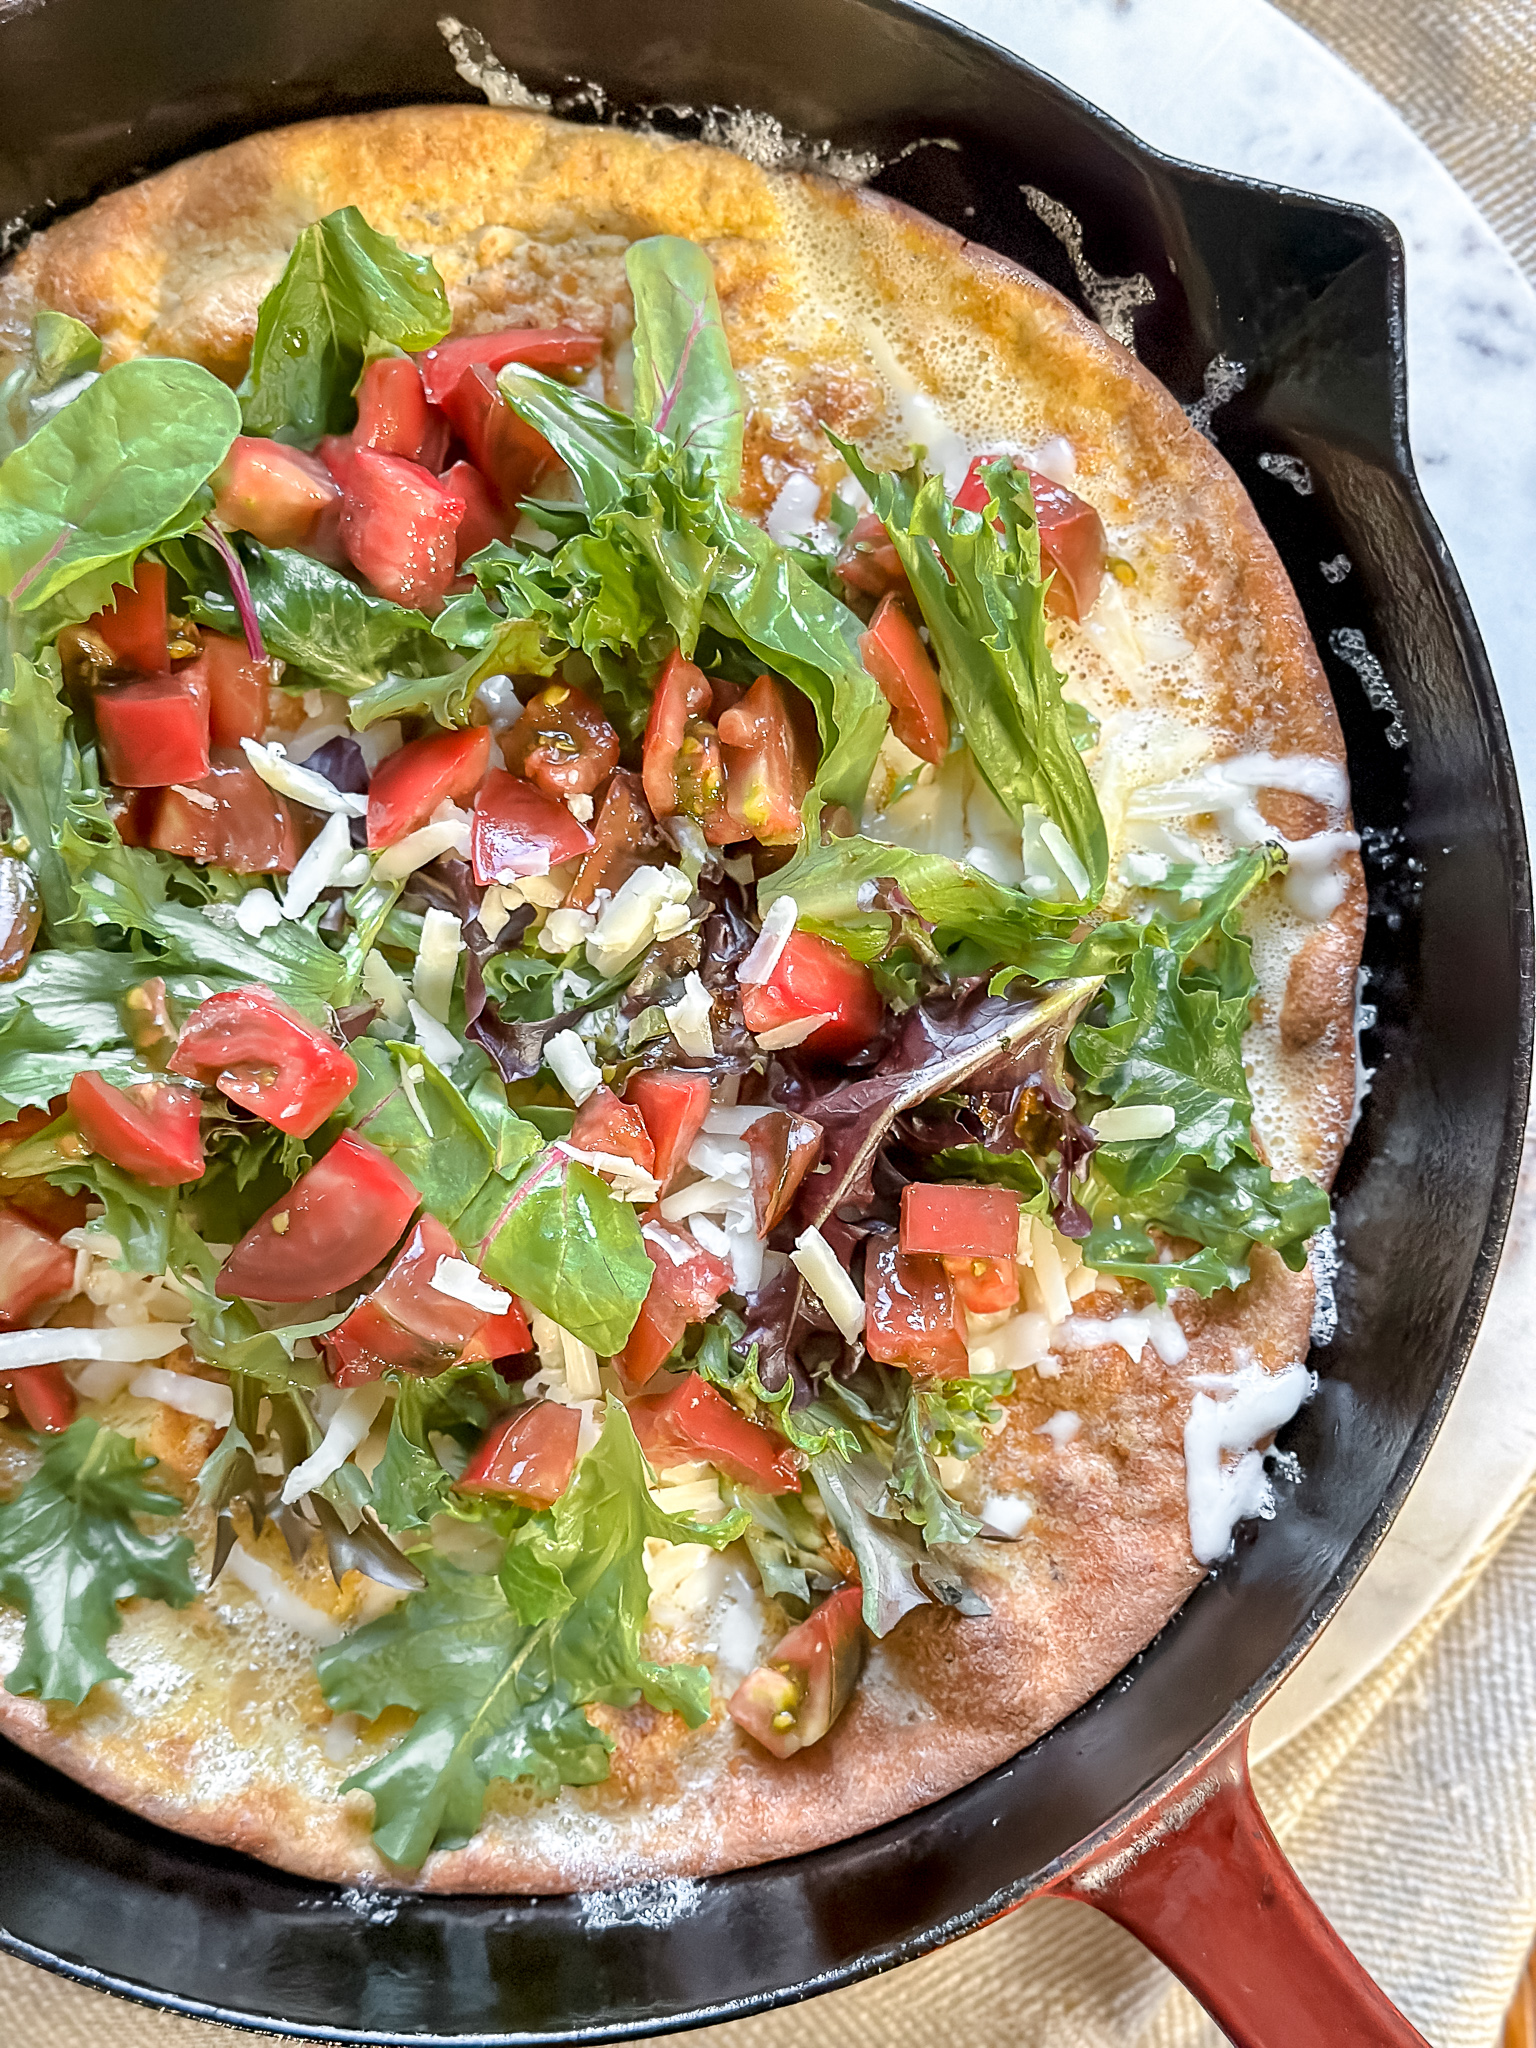 lupin flour flatbread topped as a pizza